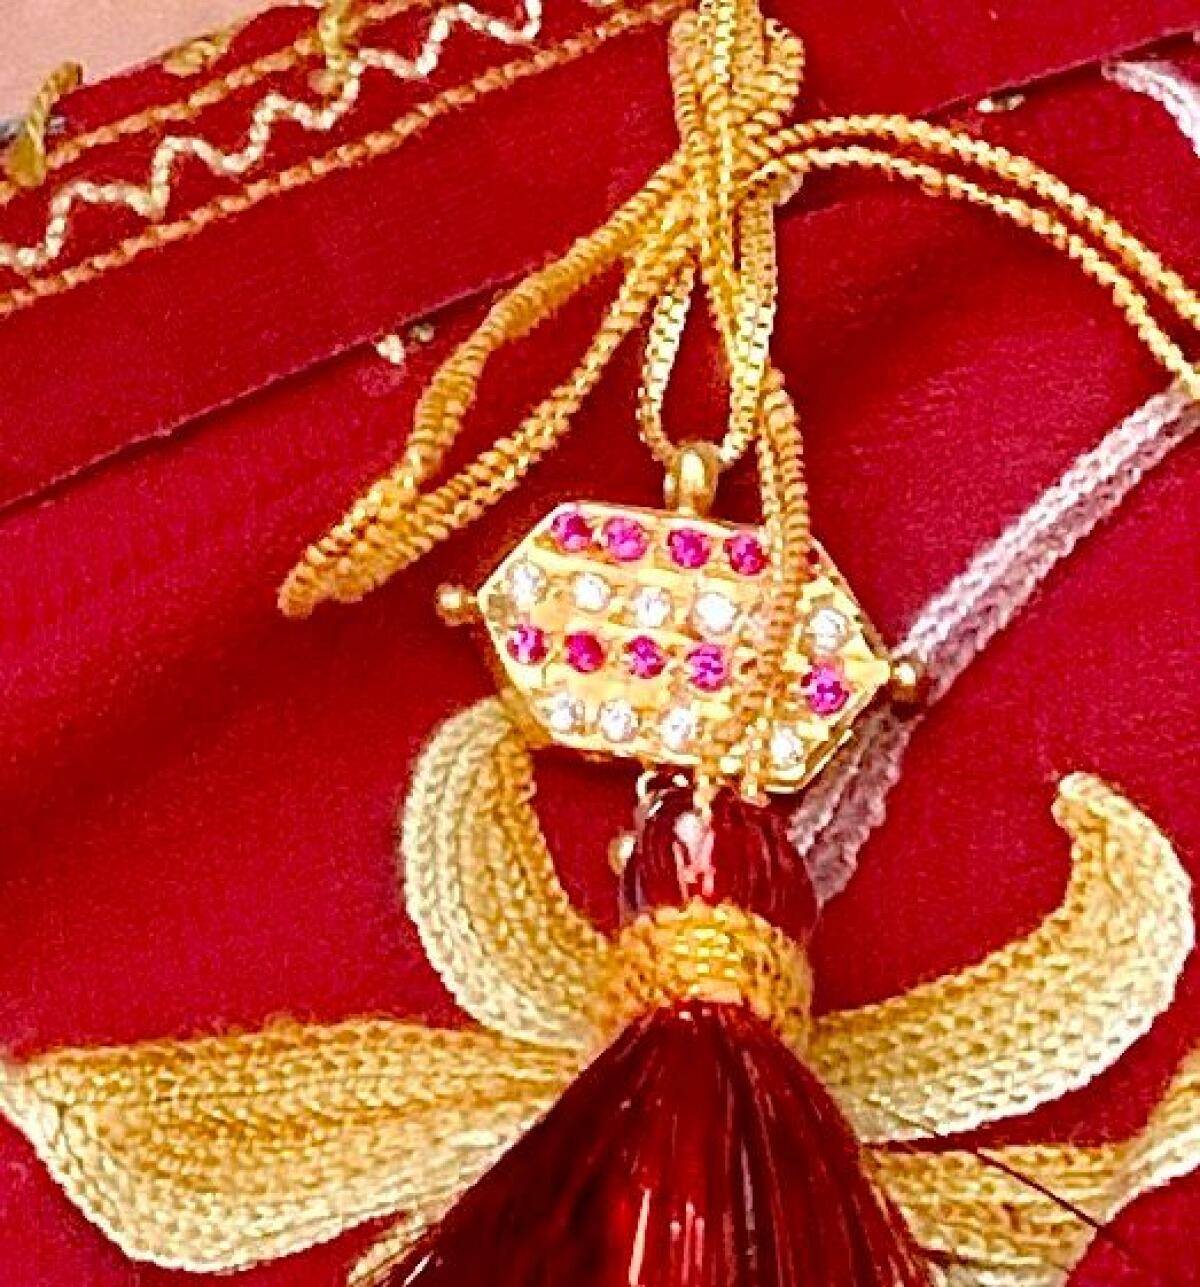 A gold diamond and ruby-encrusted dejhoor.